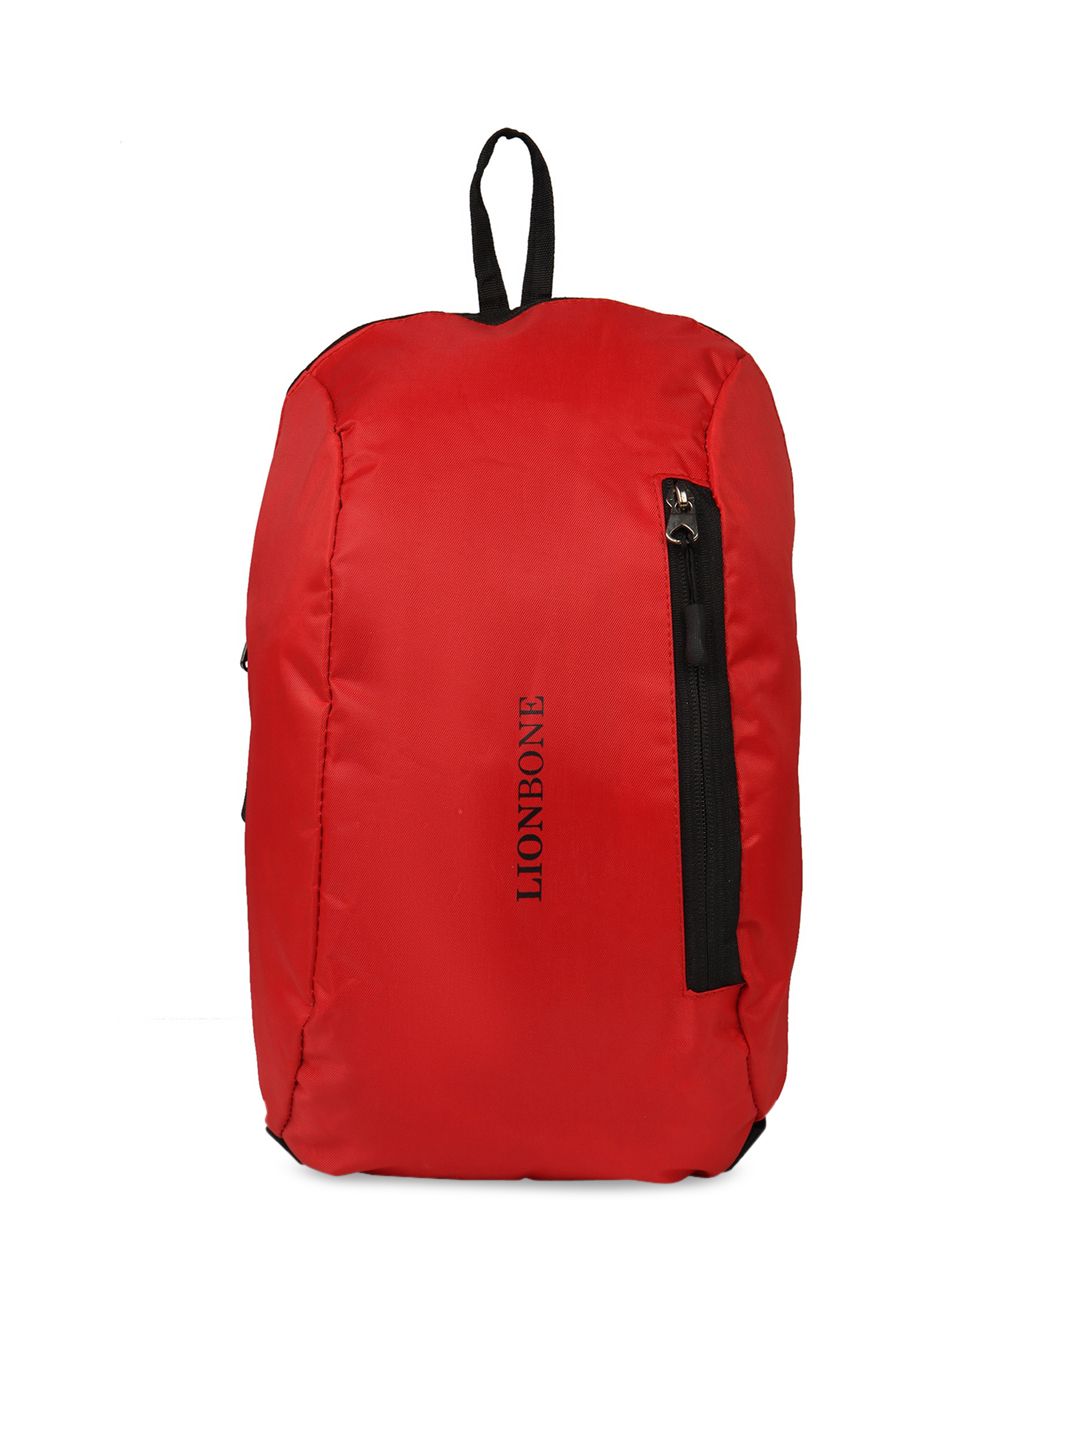 LIONBONE Unisex Red & Black Backpack Price in India